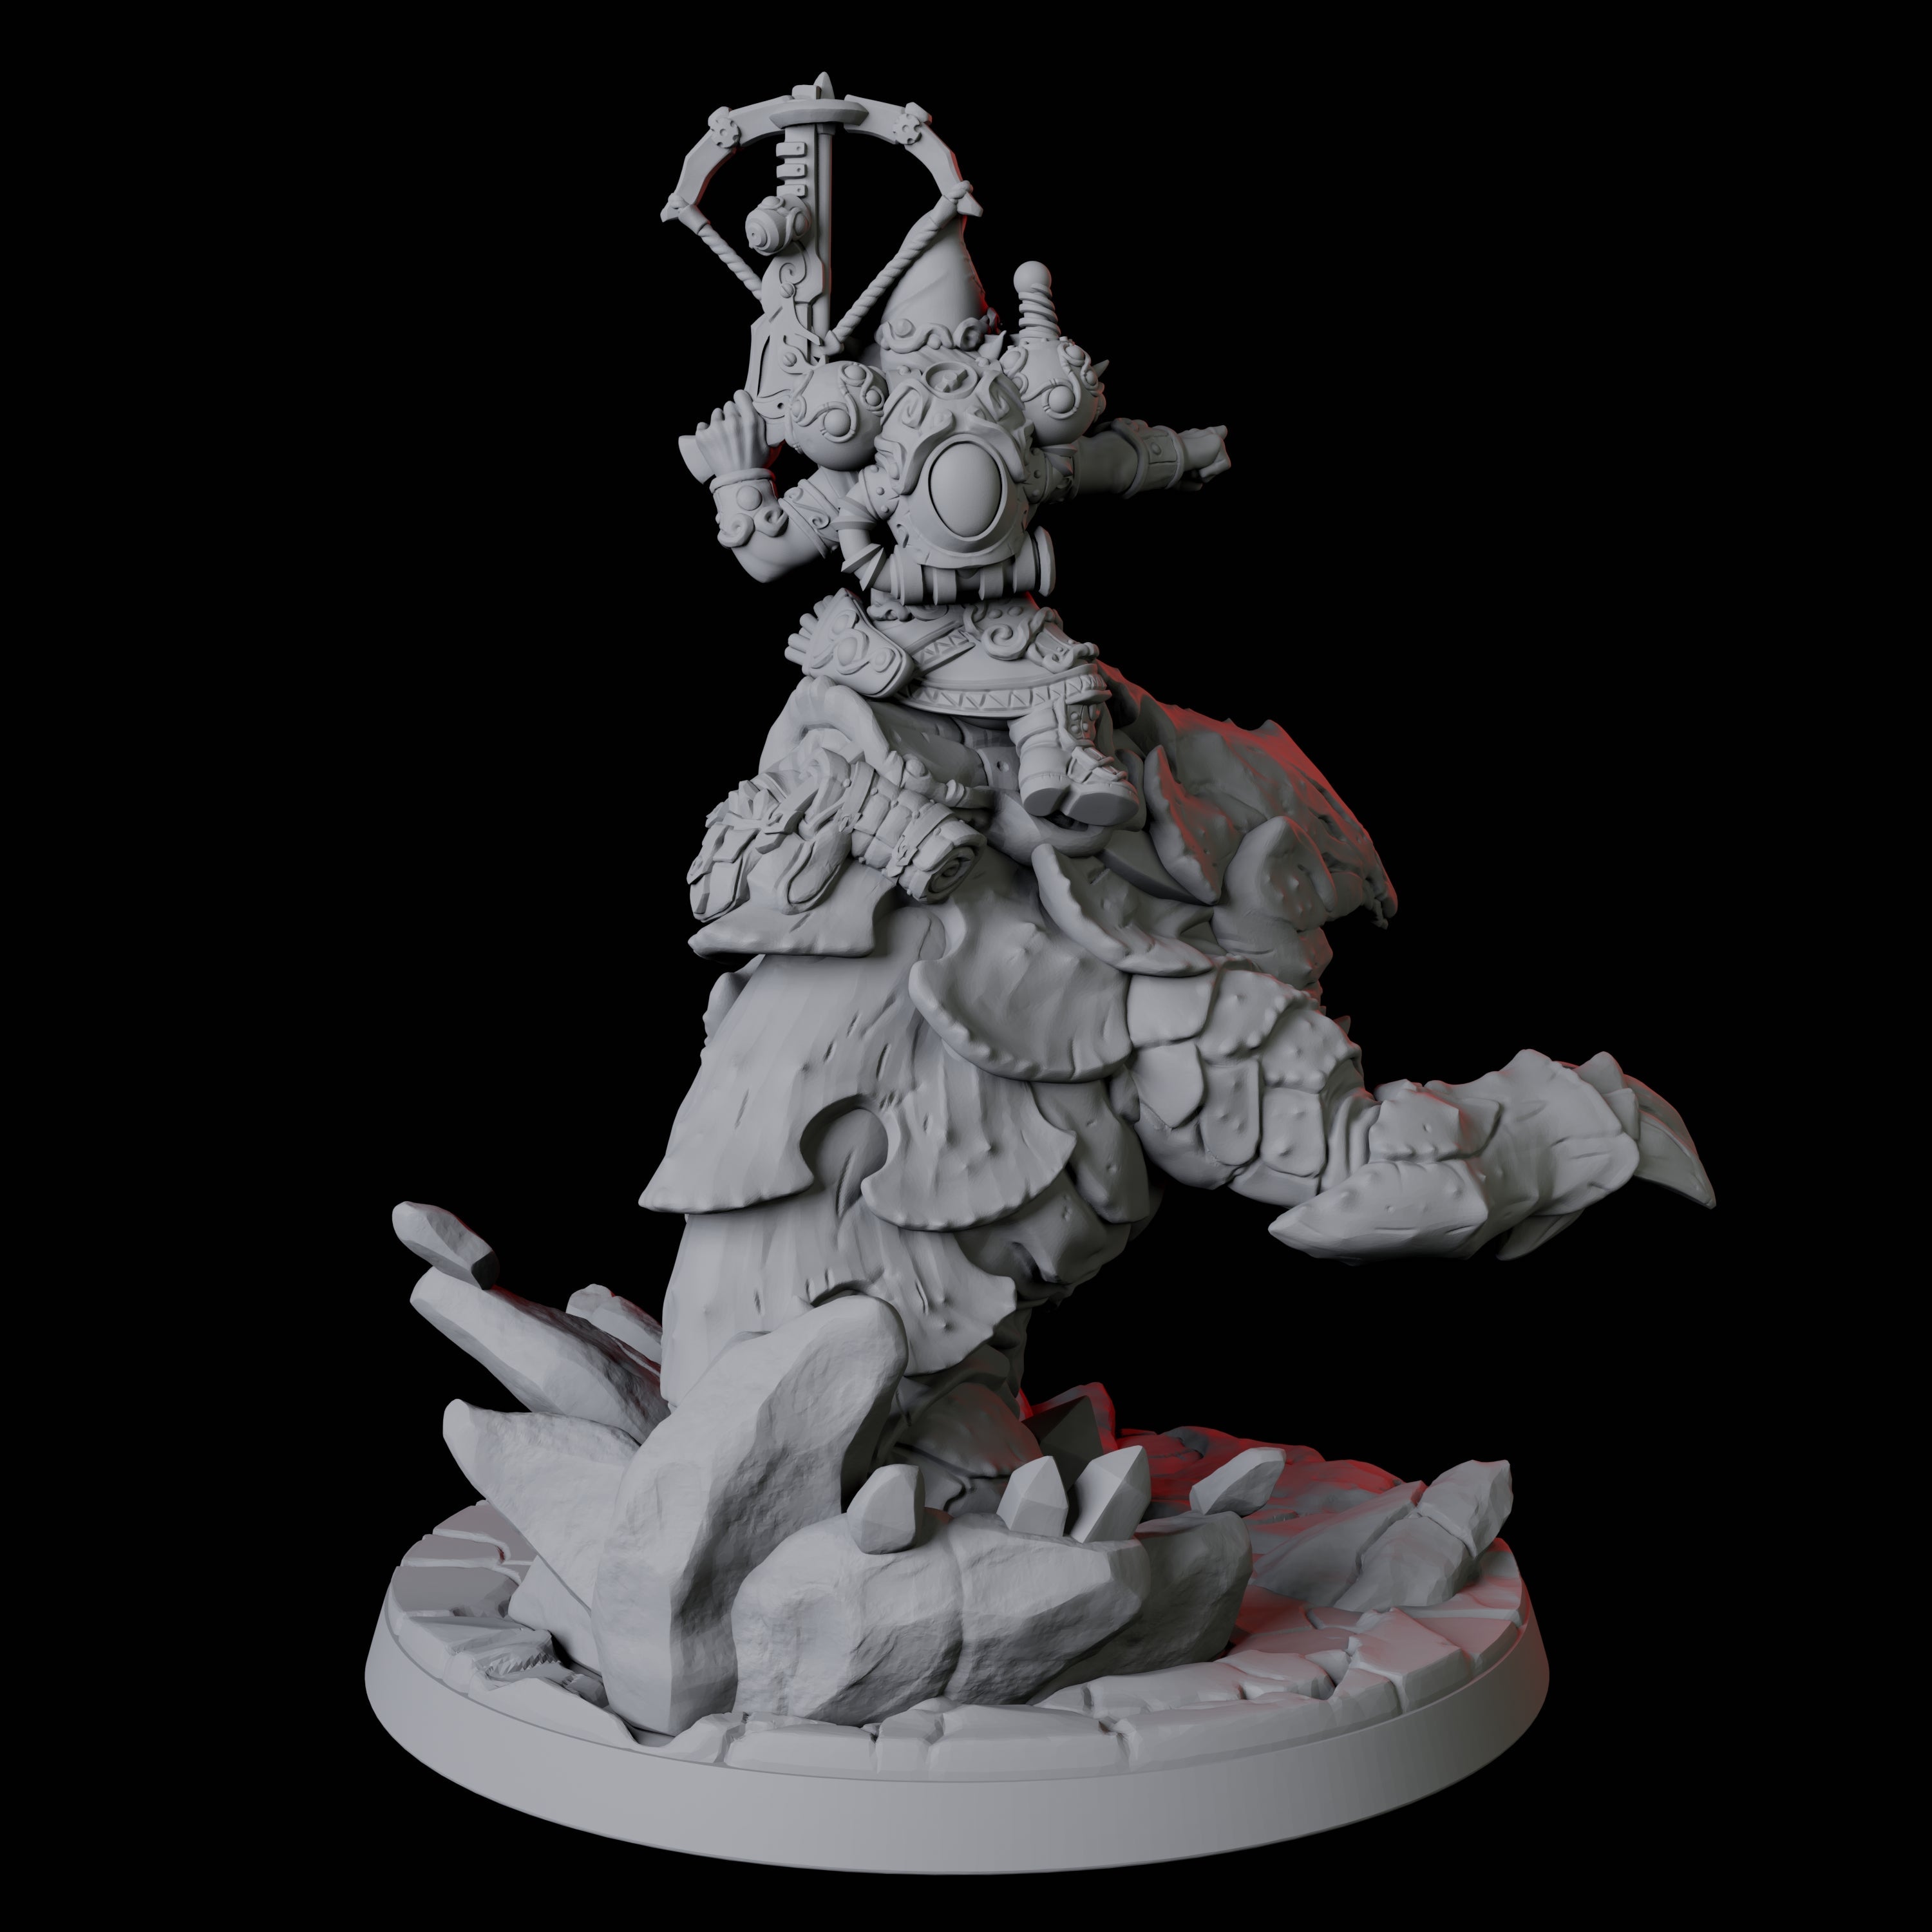 Gnome Rider C Miniature for Dungeons and Dragons, Pathfinder or other TTRPGs